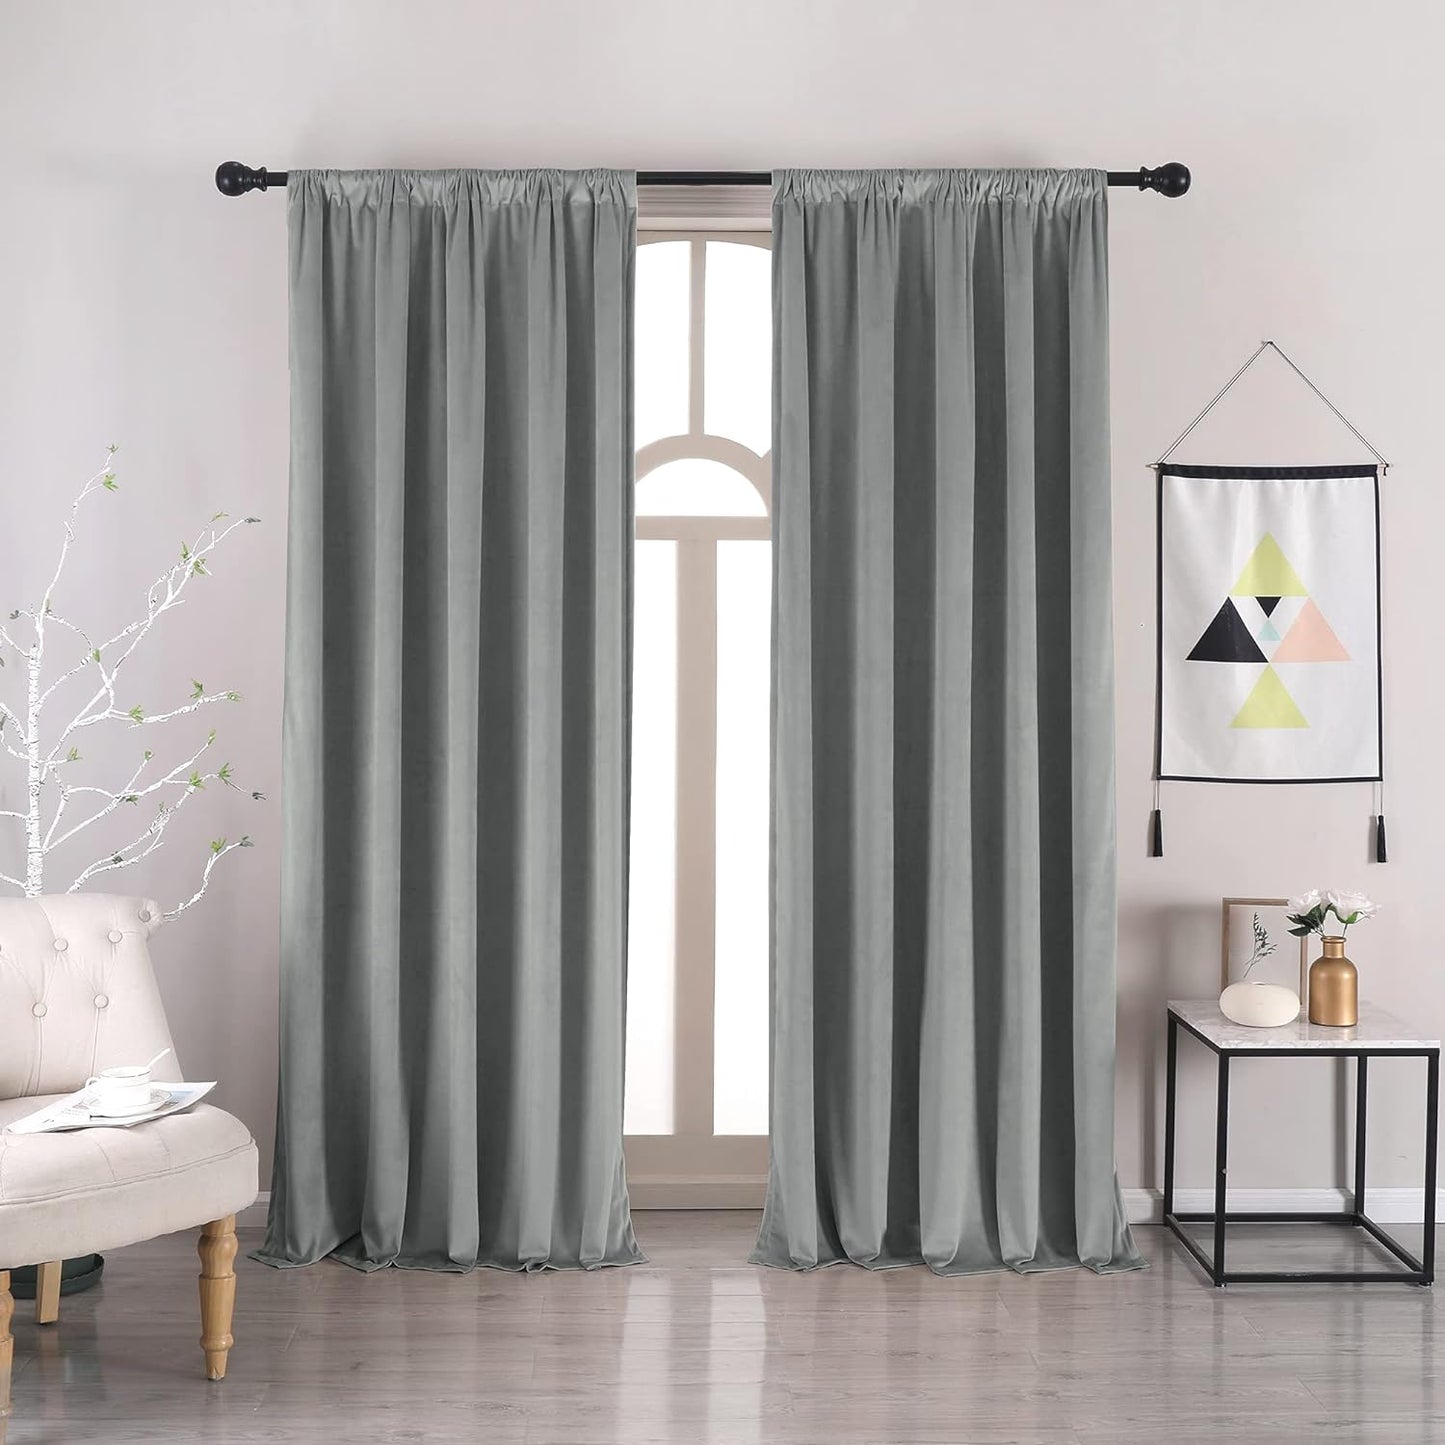 Nanbowang Green Velvet Curtains 63 Inches Long Dark Green Light Blocking Rod Pocket Window Curtain Panels Set of 2 Heat Insulated Curtains Thermal Curtain Panels for Bedroom  nanbowang Grey 42"X84" 